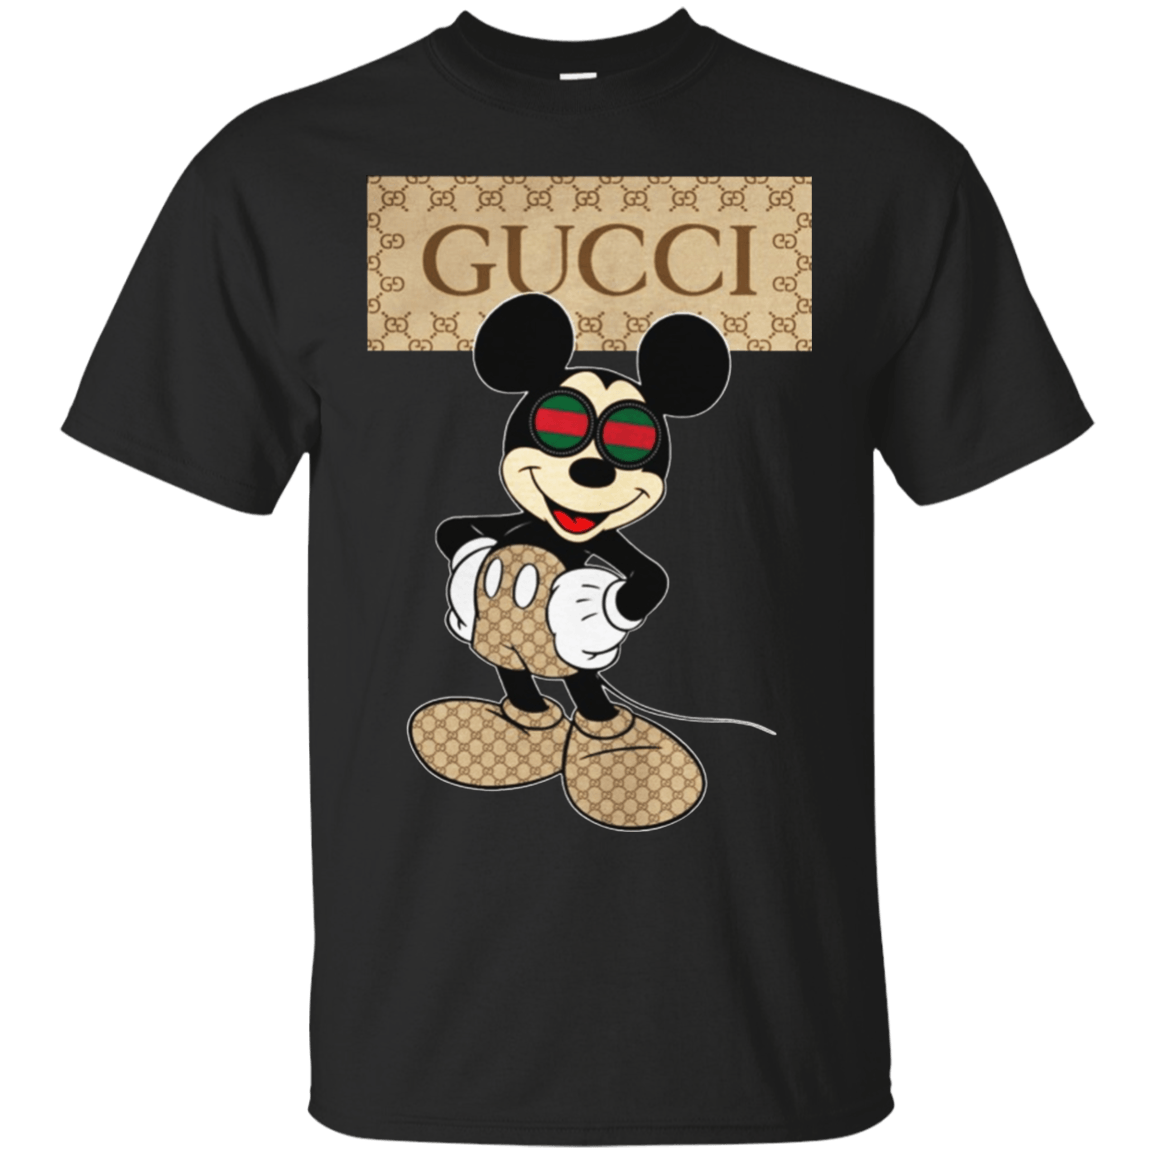 Gucci Clothing Wallpapers